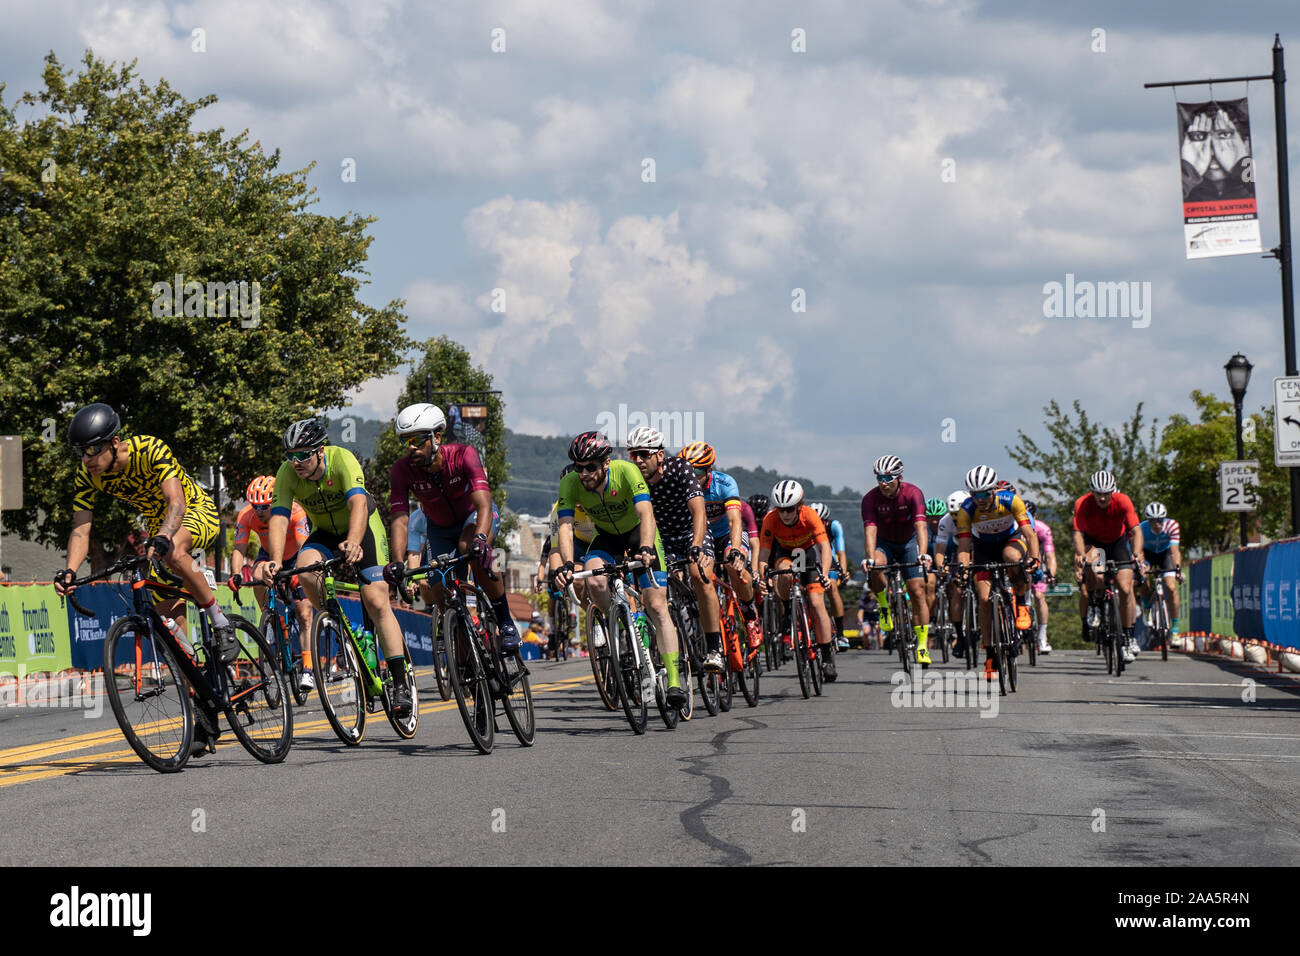 West Reading, Pa, USA- August 3, 2019: Pack of men cyclist athletes competing in cycling bike race, riding towards camera. Stock Photo